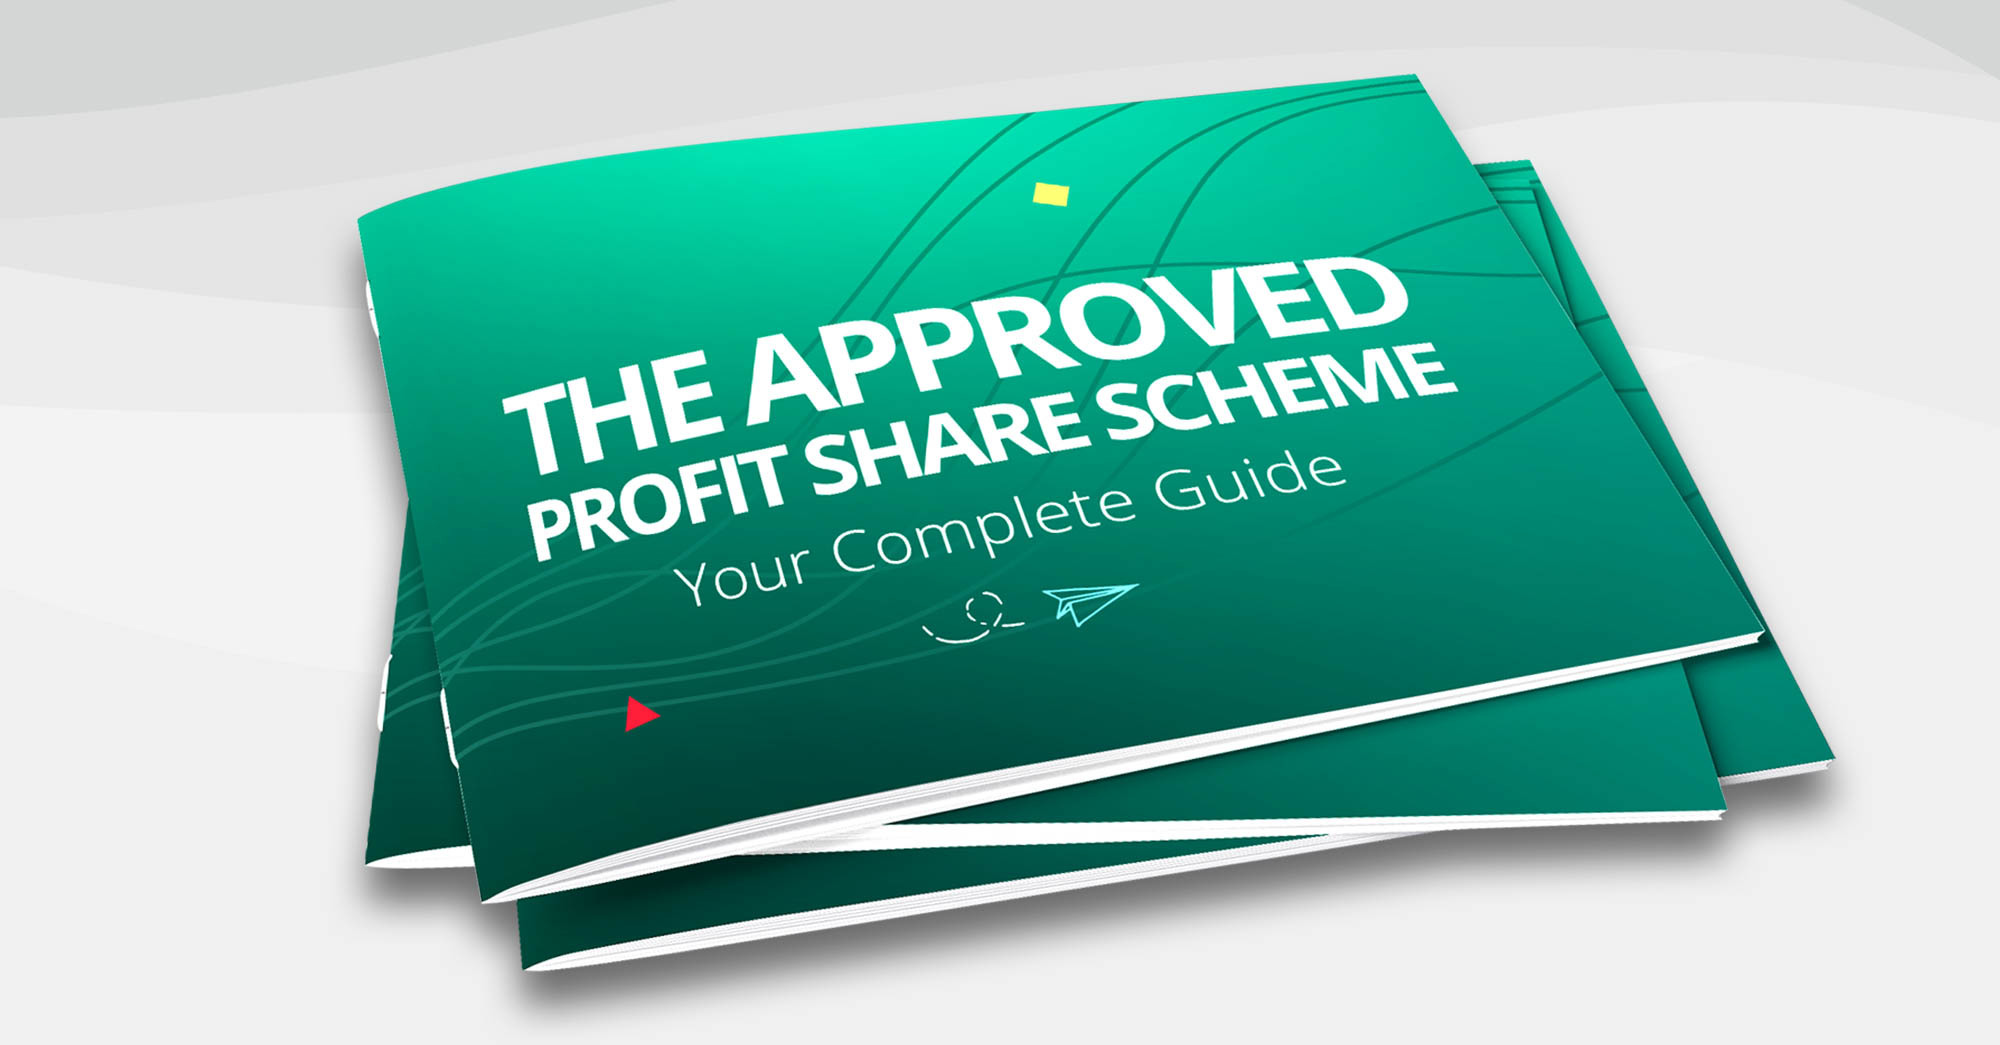 Your guide to APSS (Approved Profit Sharing Schemes)